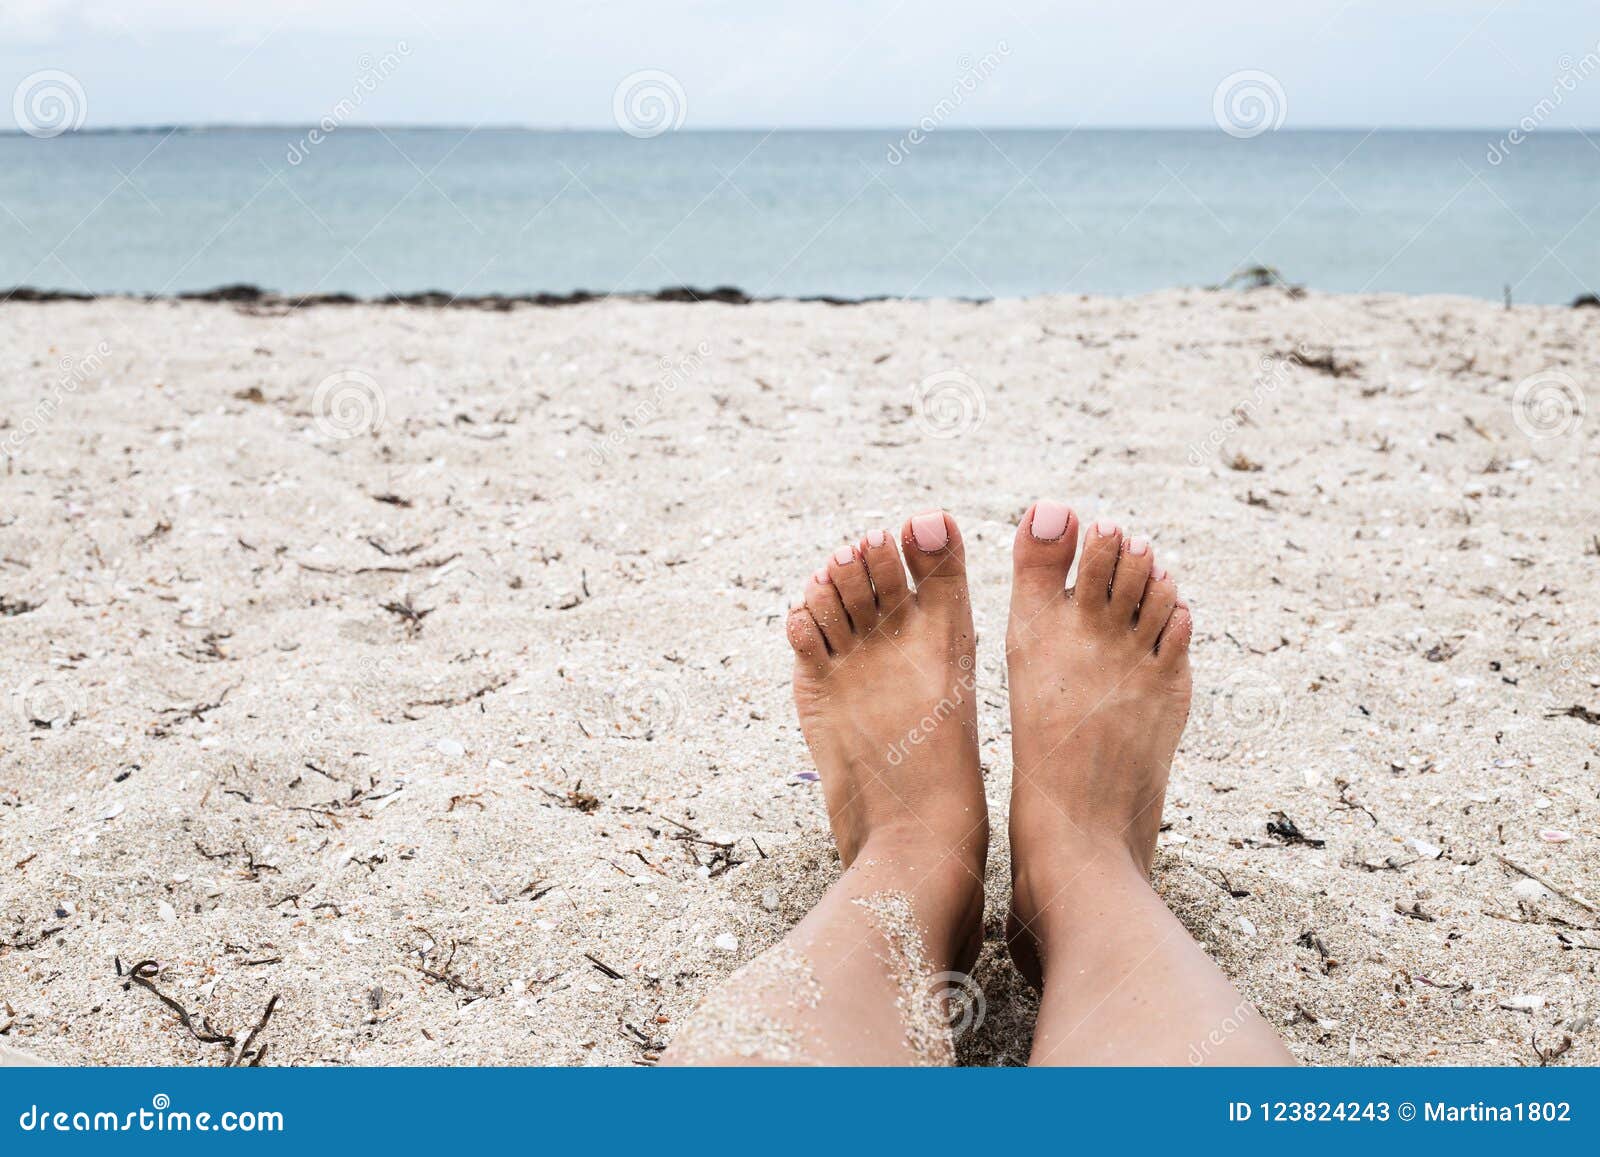 Female Legs On A Tropical Beach Stock Image Image Of Beauty Girl